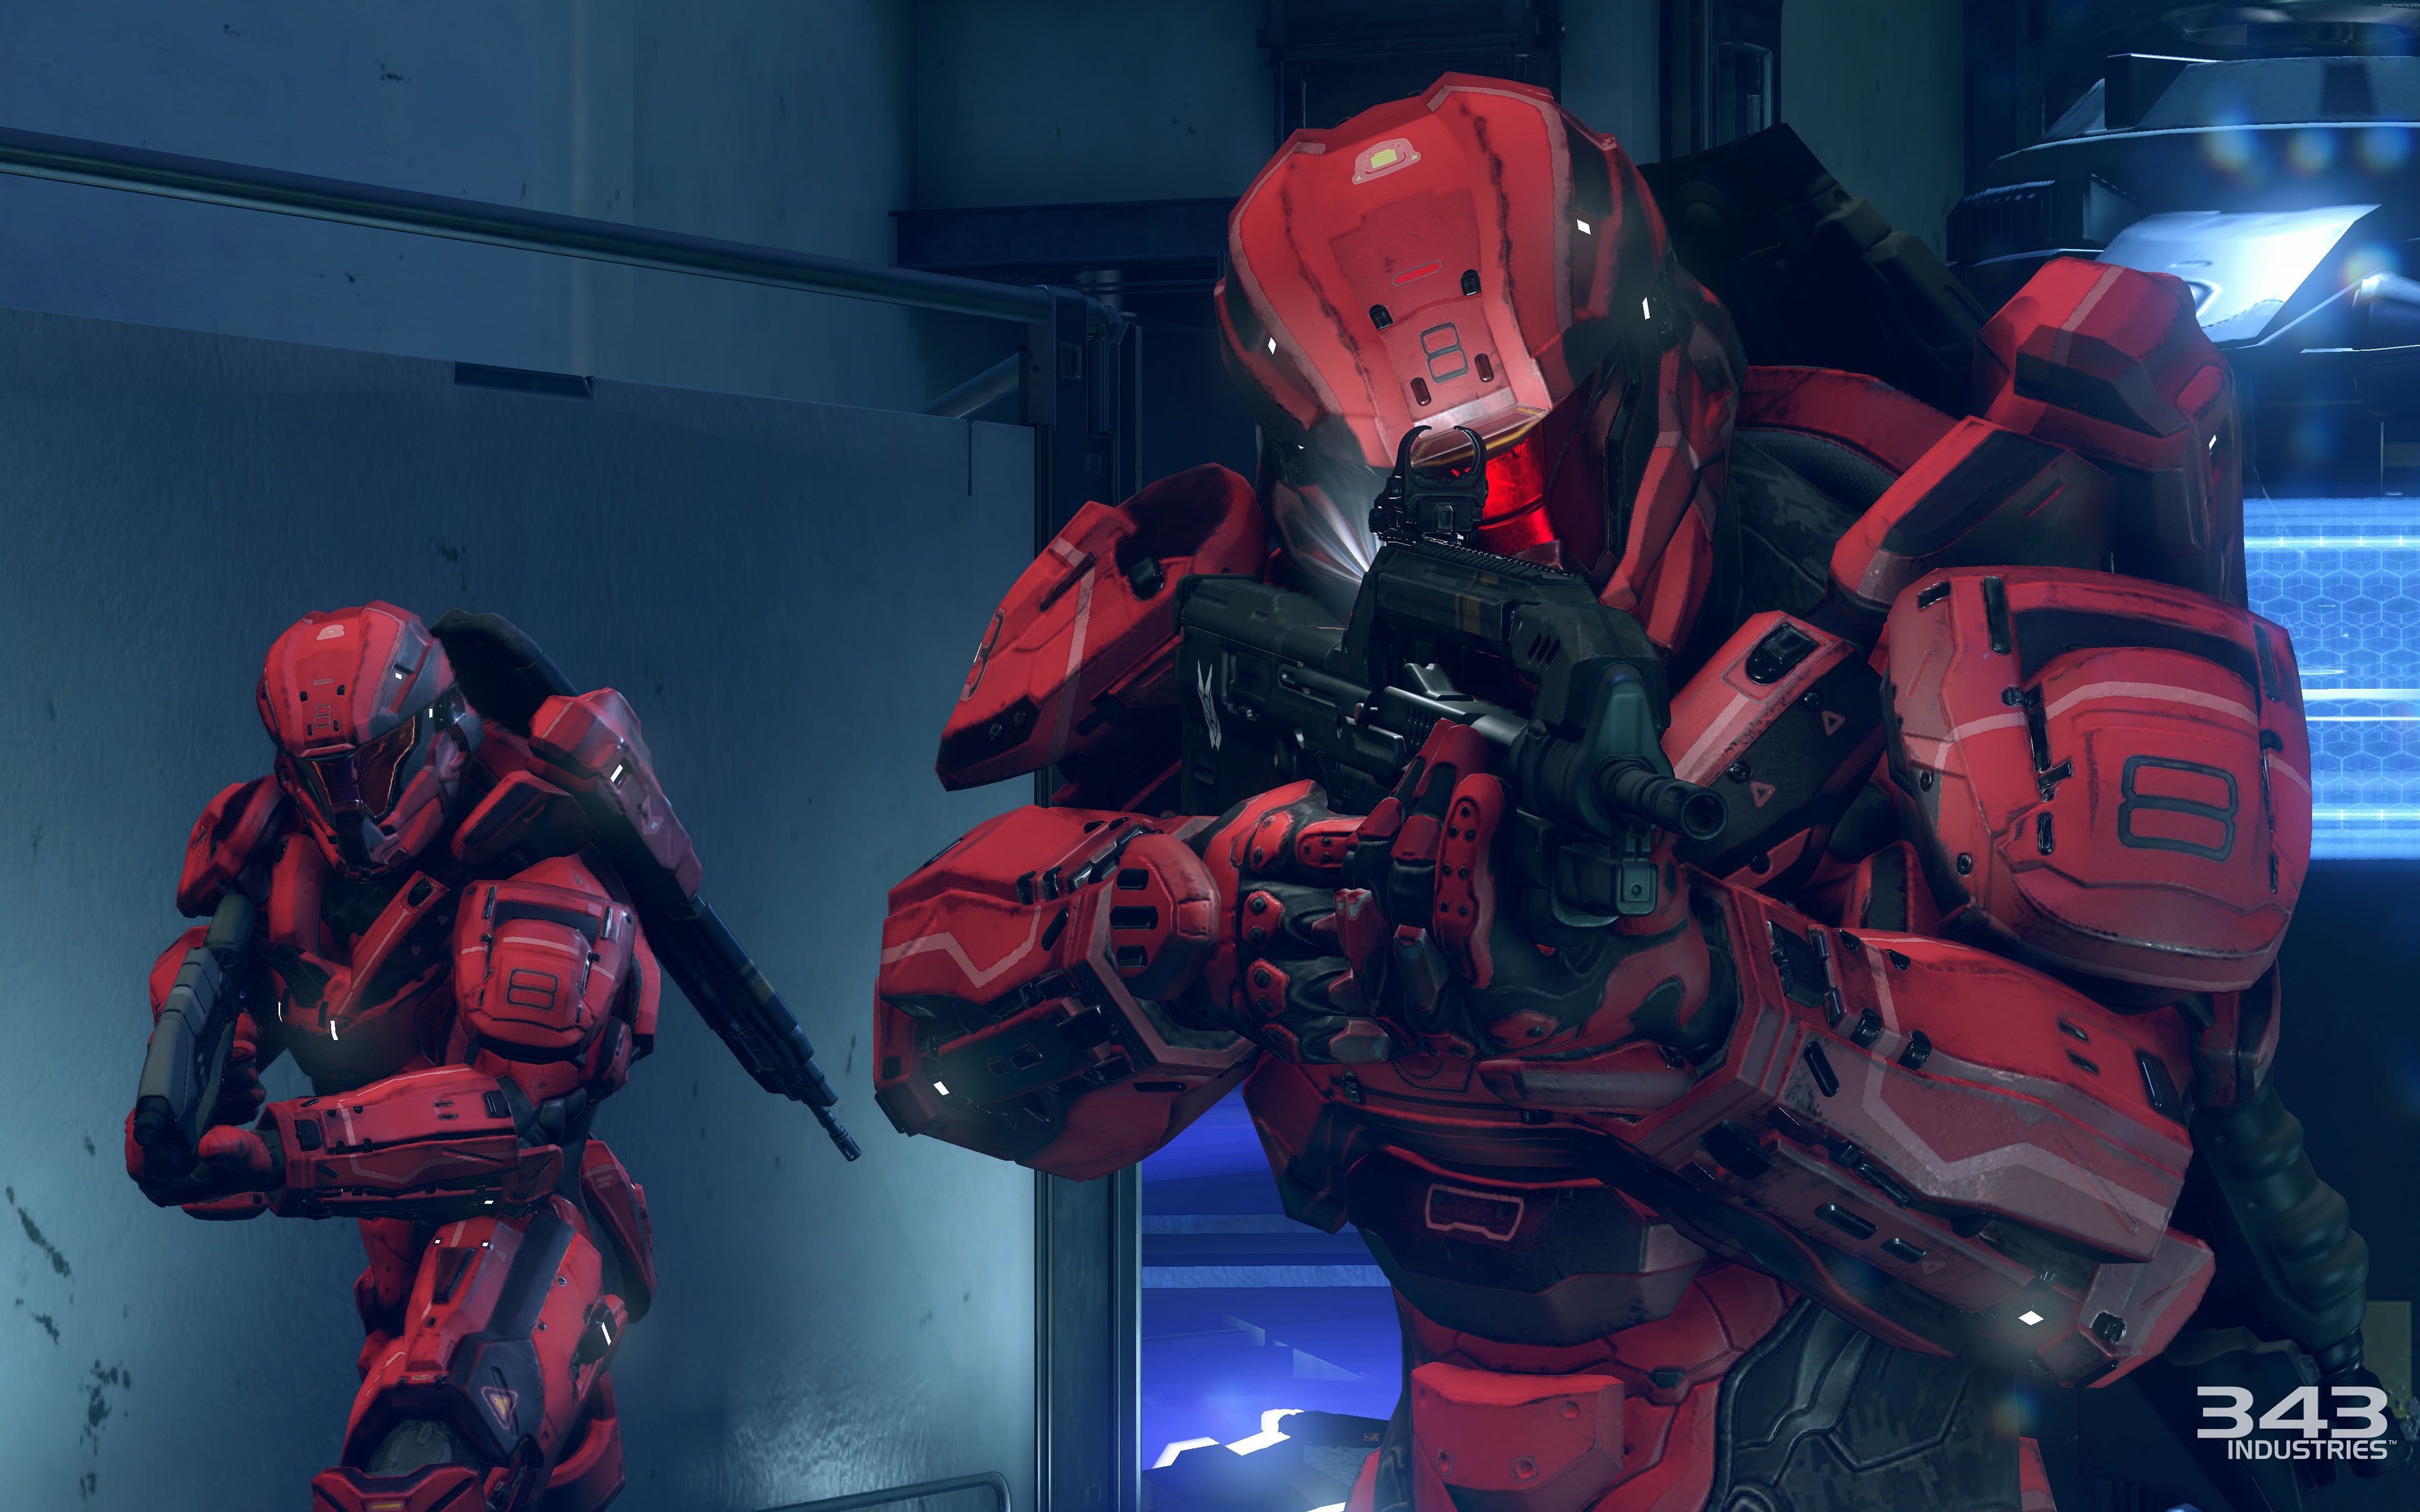 Halo 5: Guardians, video games, military, helmet, government